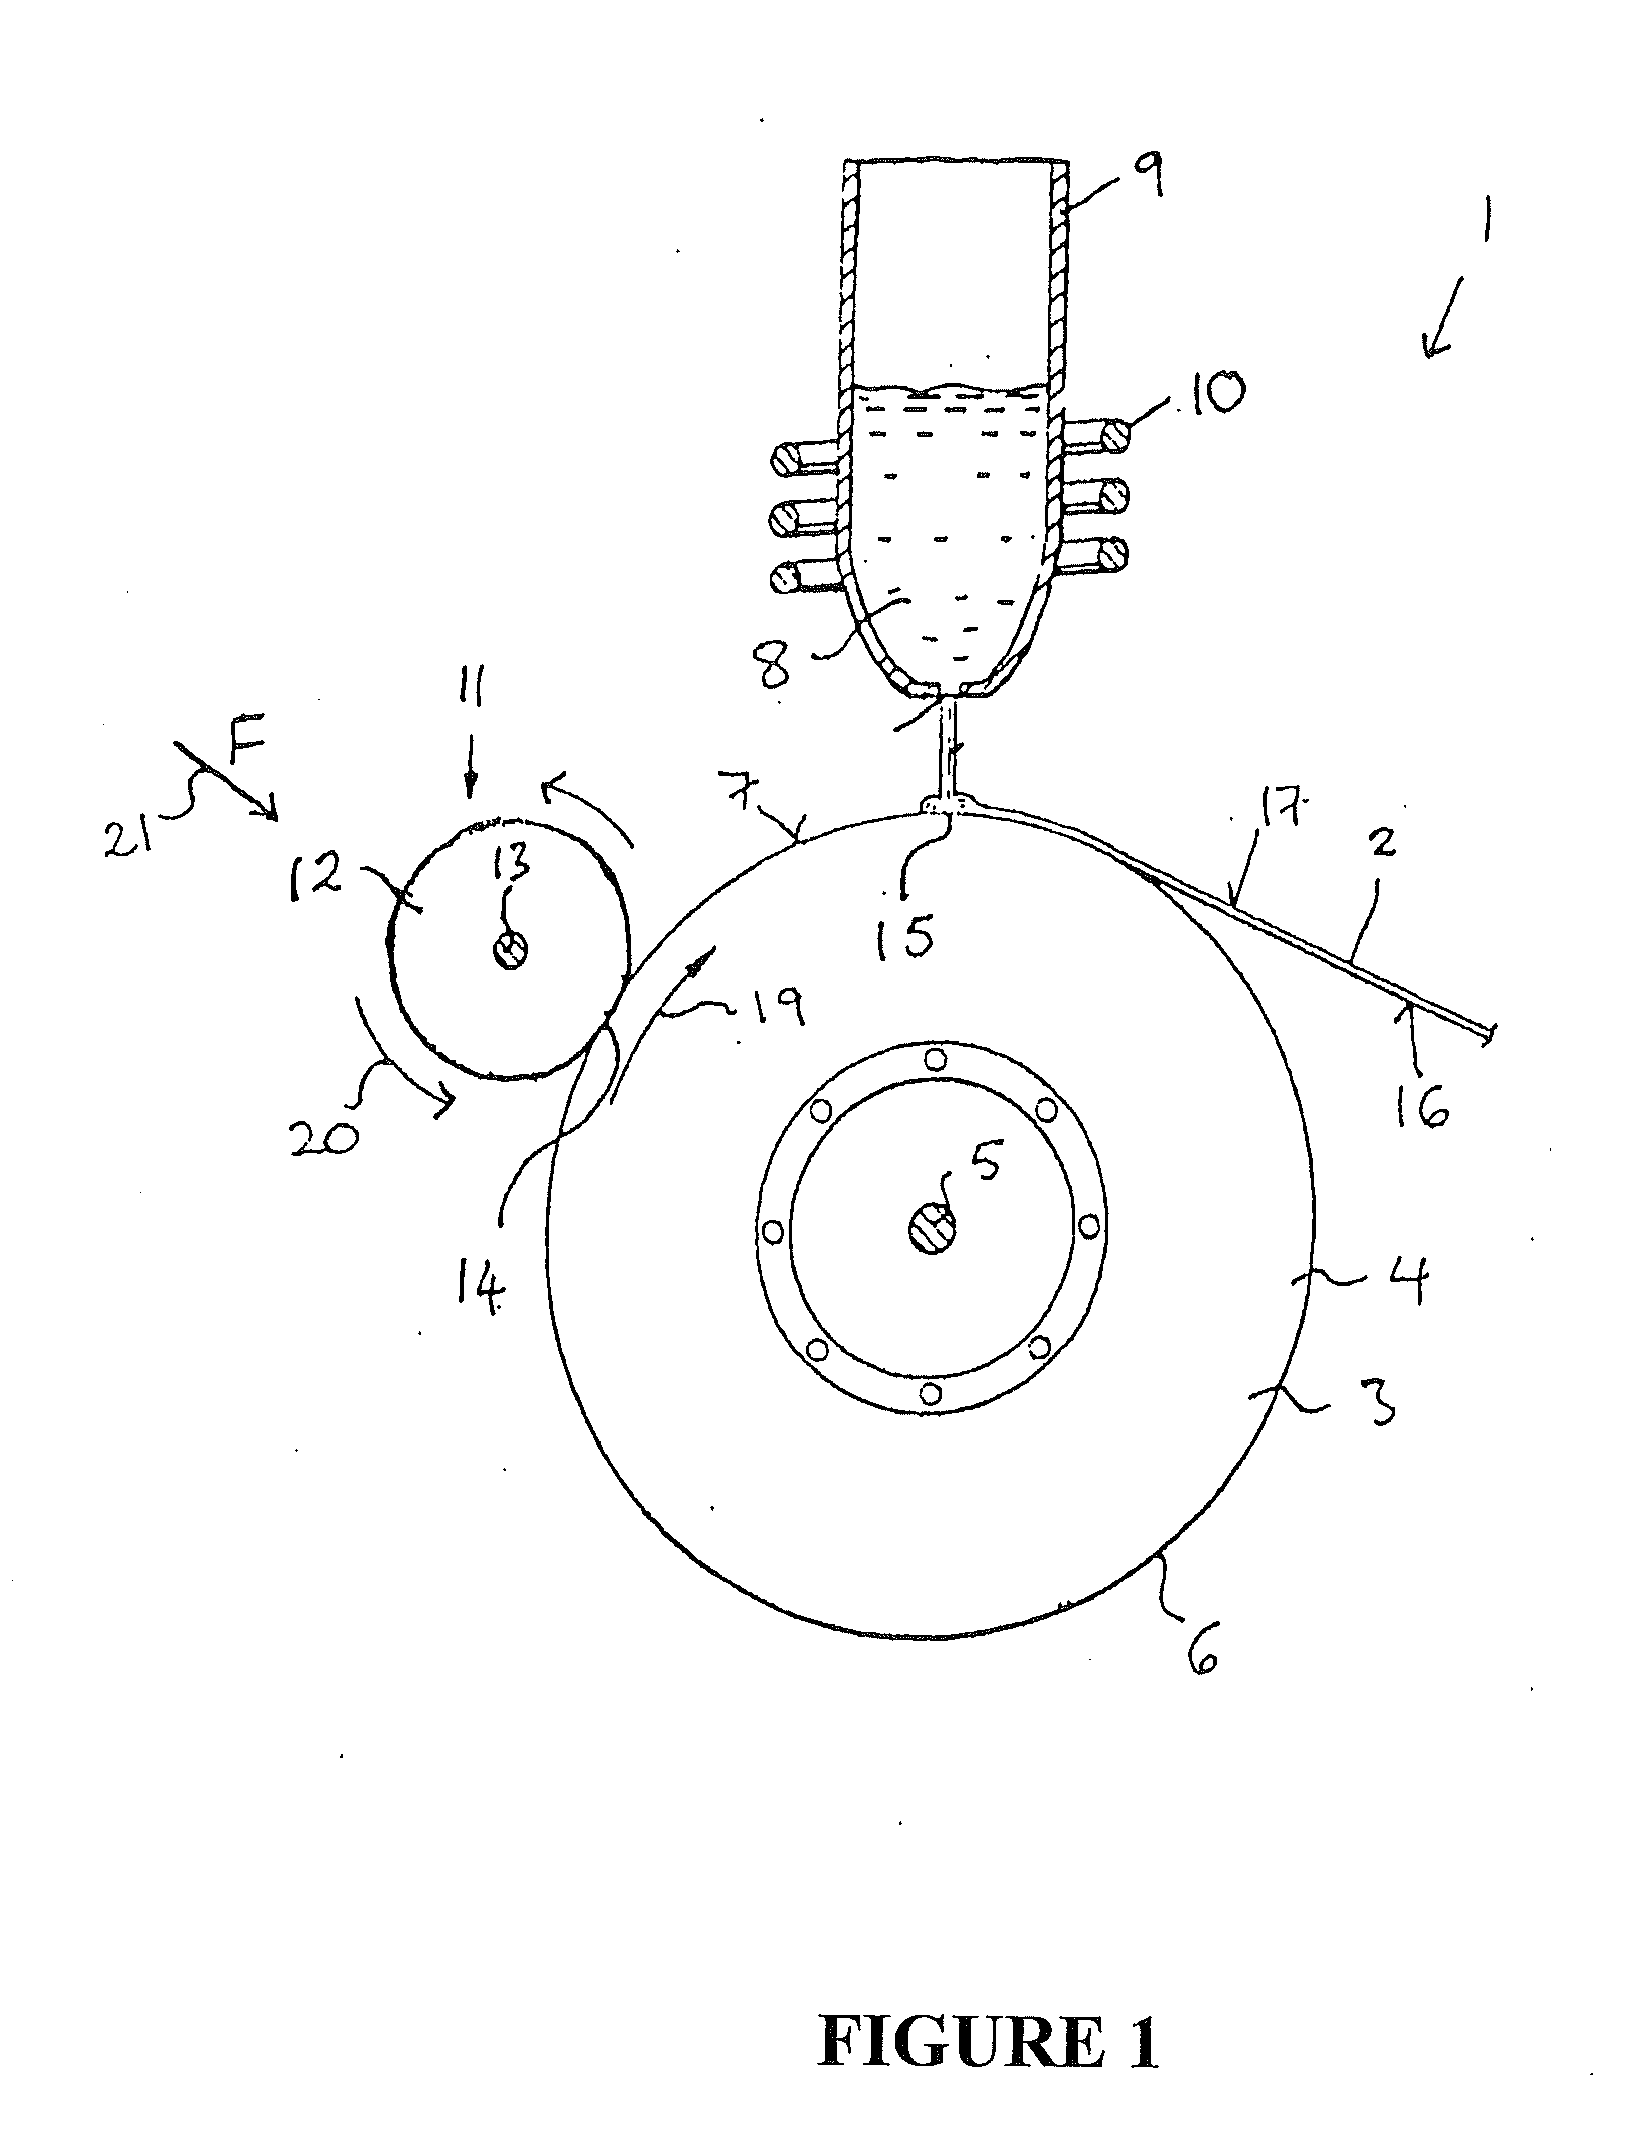 Device and Method for the Production of a Metallic Strip